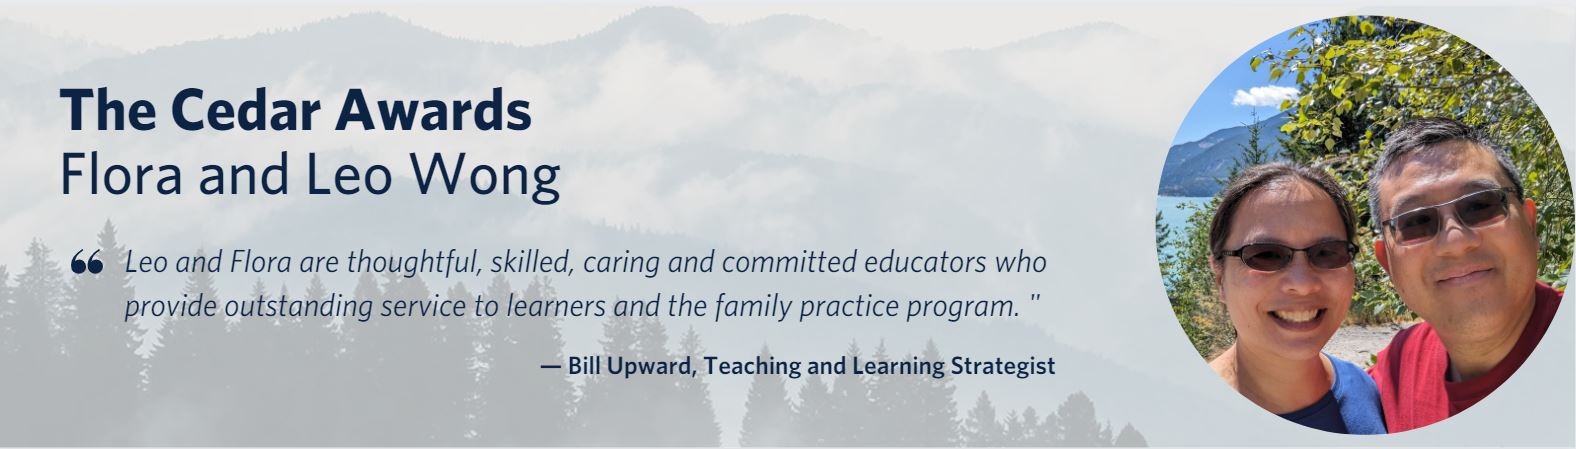 Flora and Leo next to each other with a quote saying: Leo and Flora are thoughtful, skilled, caring and committed educators who provide outstanding service to learners and the family practice program.